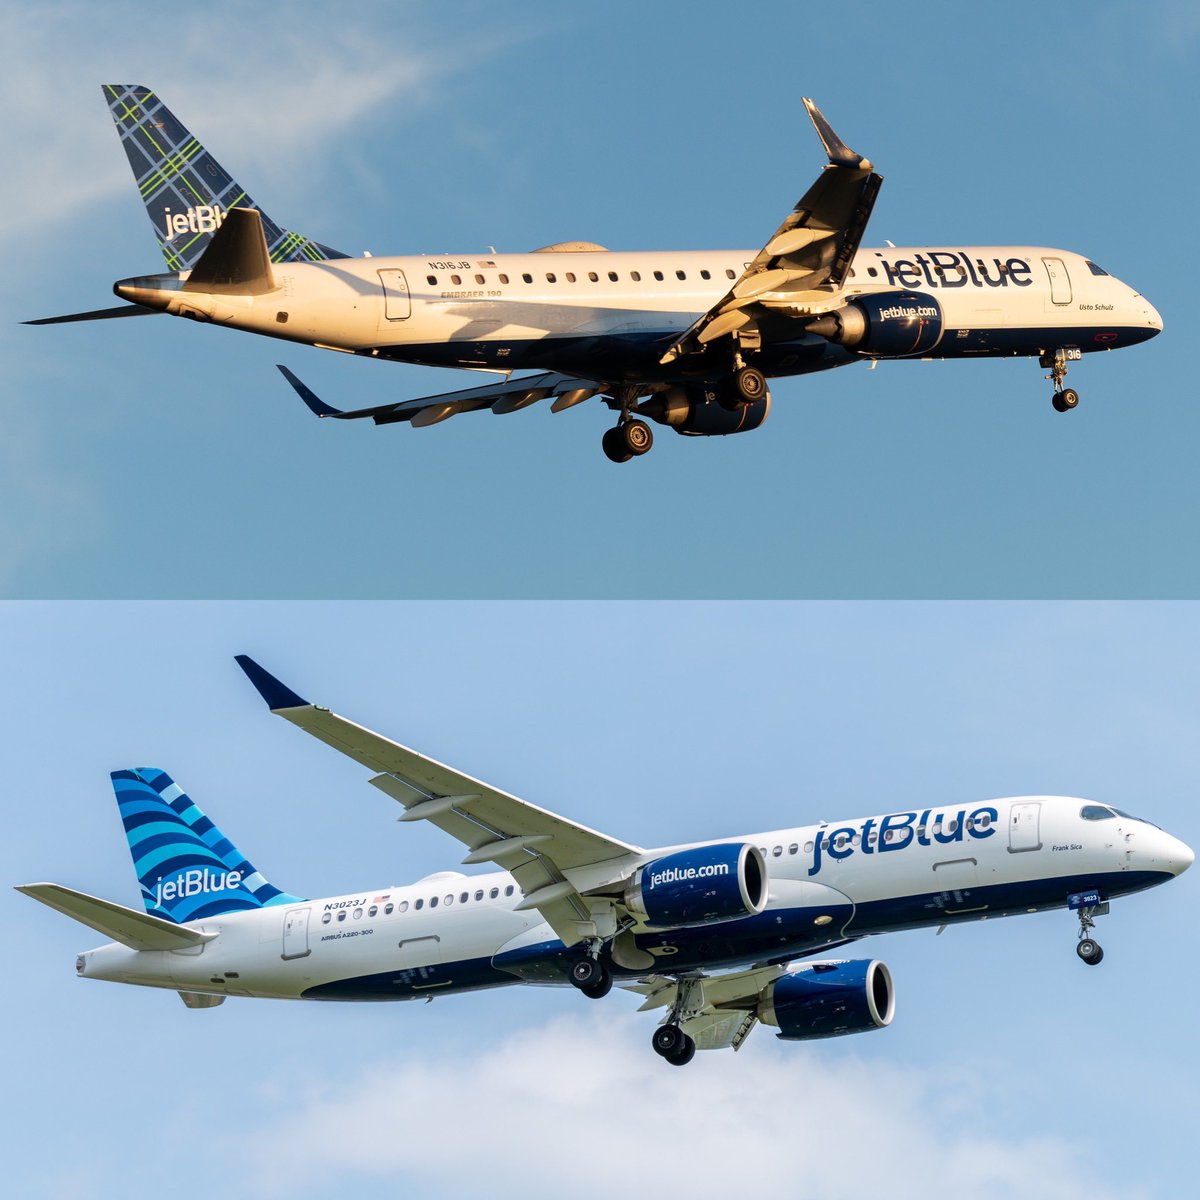 Old or new? As @JetBlue brings in more @Airbus a220s the ejets are starting their phase out process. Soon will see less and less of the Ejets in the skies. 

Will you miss the Ejets? 

#aviationdaily #aviationlovers #aviationphotography #AvGeek #airplanes #JetBlue